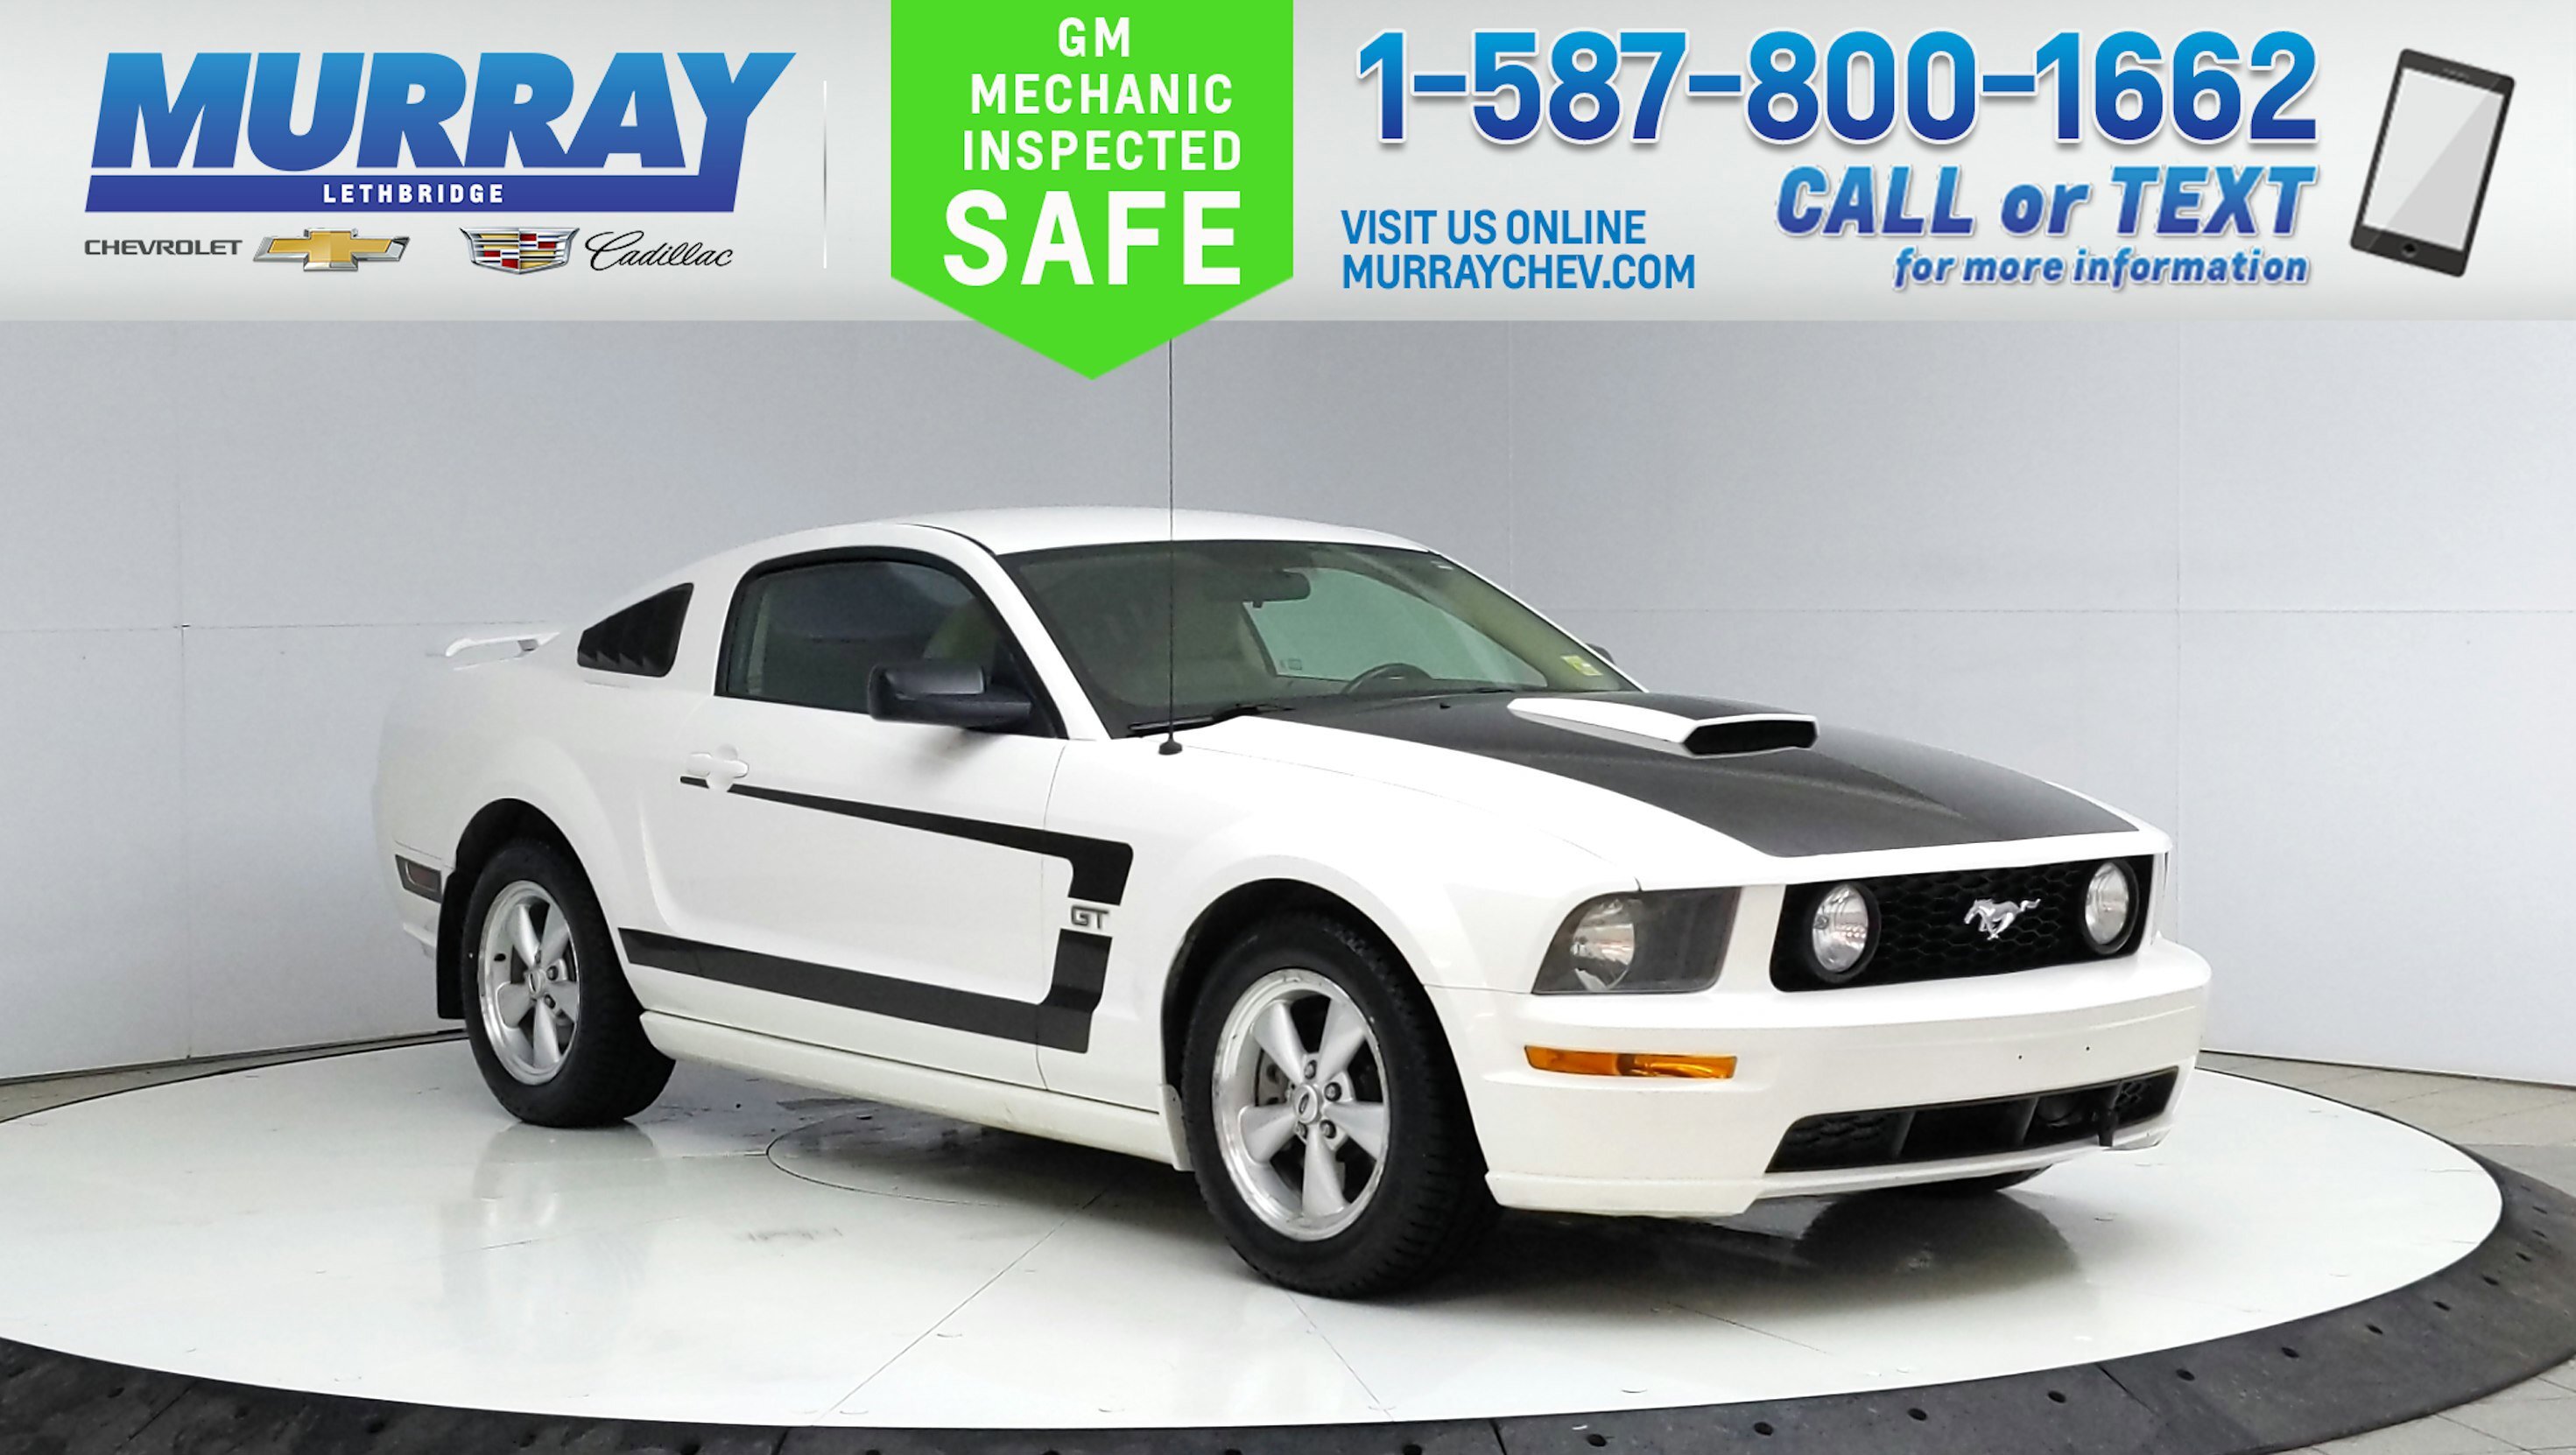 2007 Ford Mustang GT | 4.6L V8 | Automatic